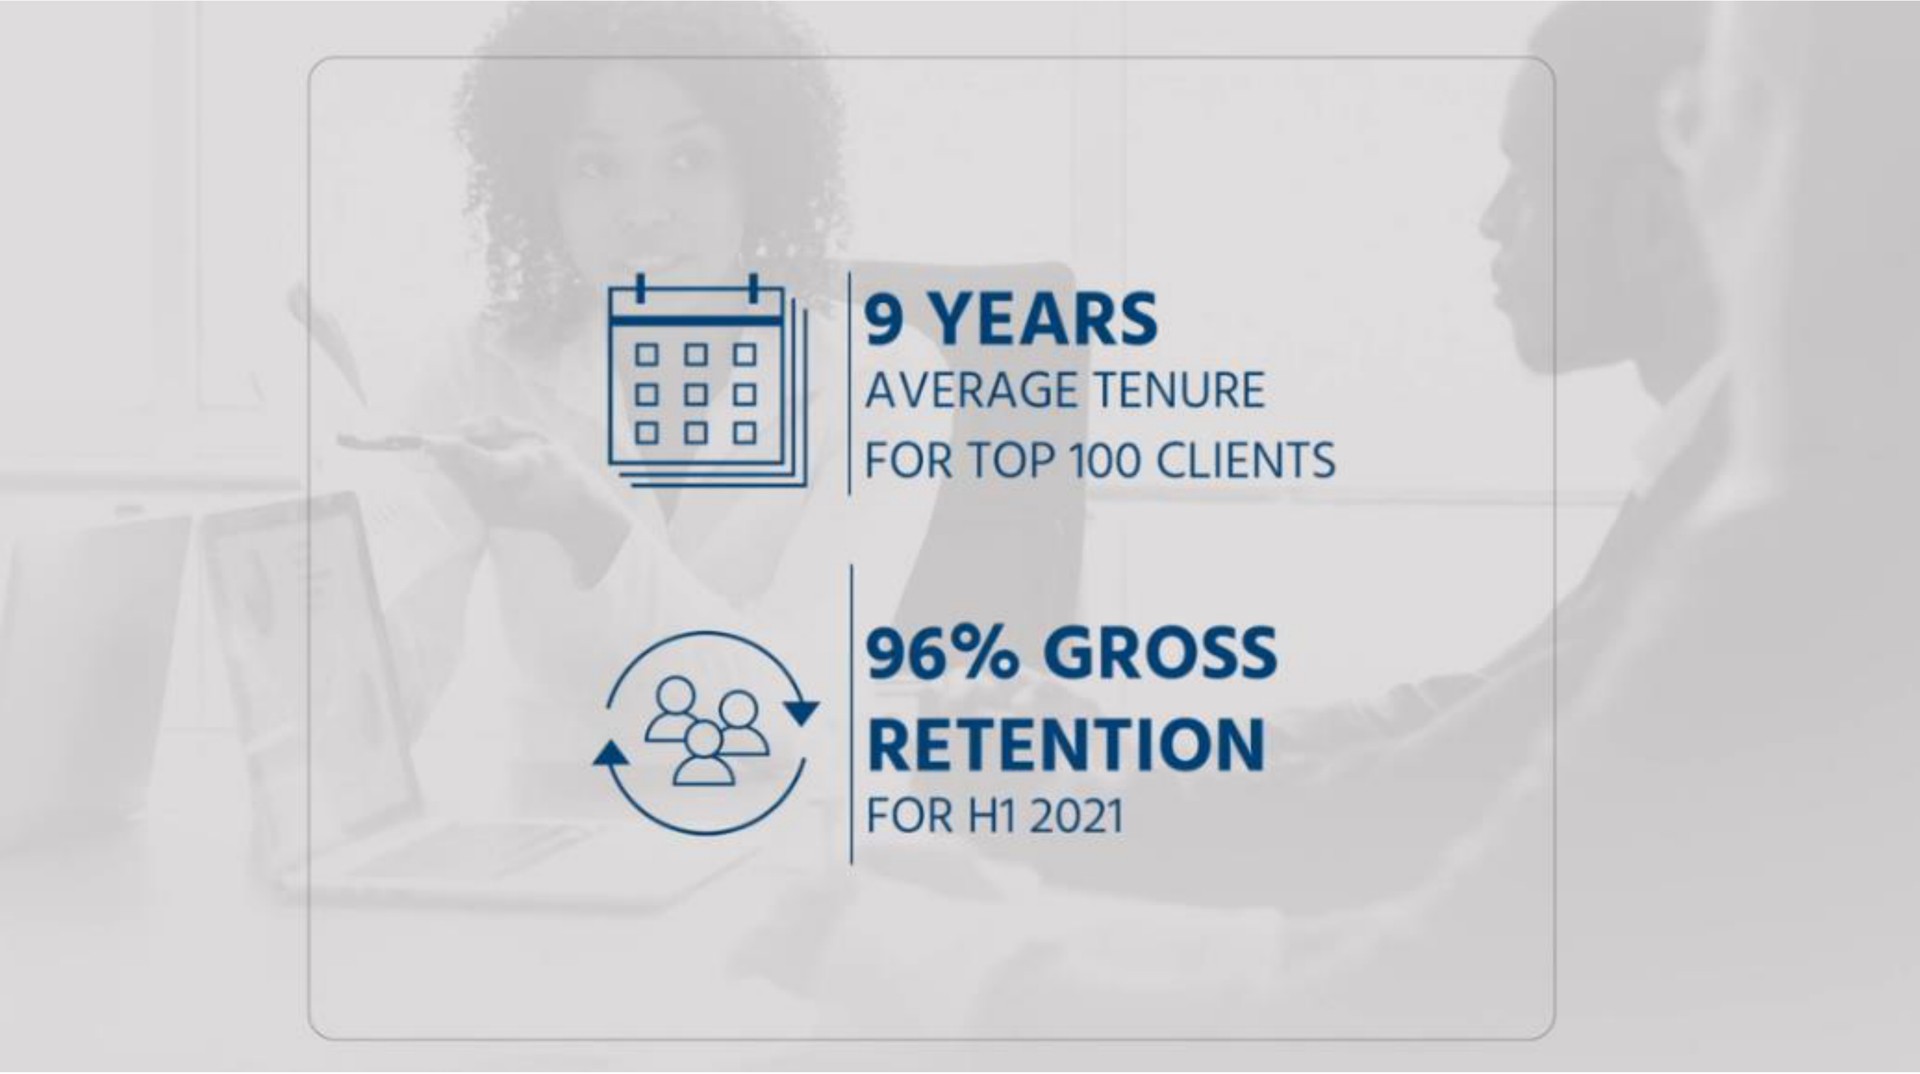 years average tenure for top clients gross cay retention for | Sterling